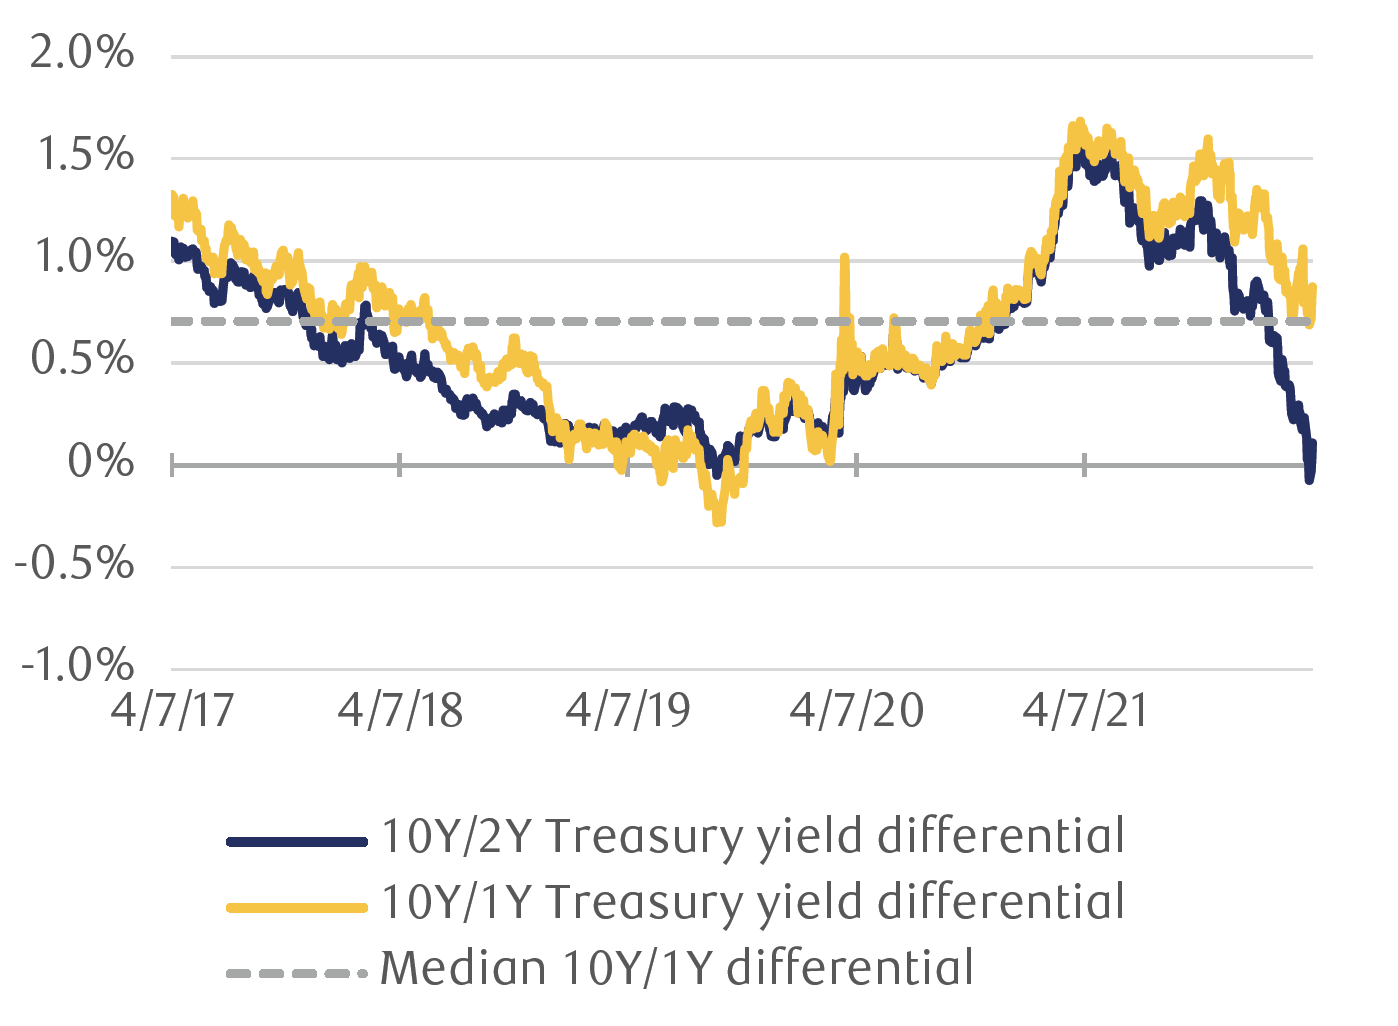 The line chart compares two different measurements of U.S. Treasury yield curve shape from April 7, 2017 through April 6, 2022. One is the difference between the 10-year yield and the 2-year yield, which has fallen significantly this year and was briefly negative this week. The other measurement is the difference between the 10-year and 1-year yields, which remains in positive territory after diverging from the 10-year/2-year reading earlier this year. A third line shows the median level of the 10-year/1-year difference; the current reading is slightly above the median level.